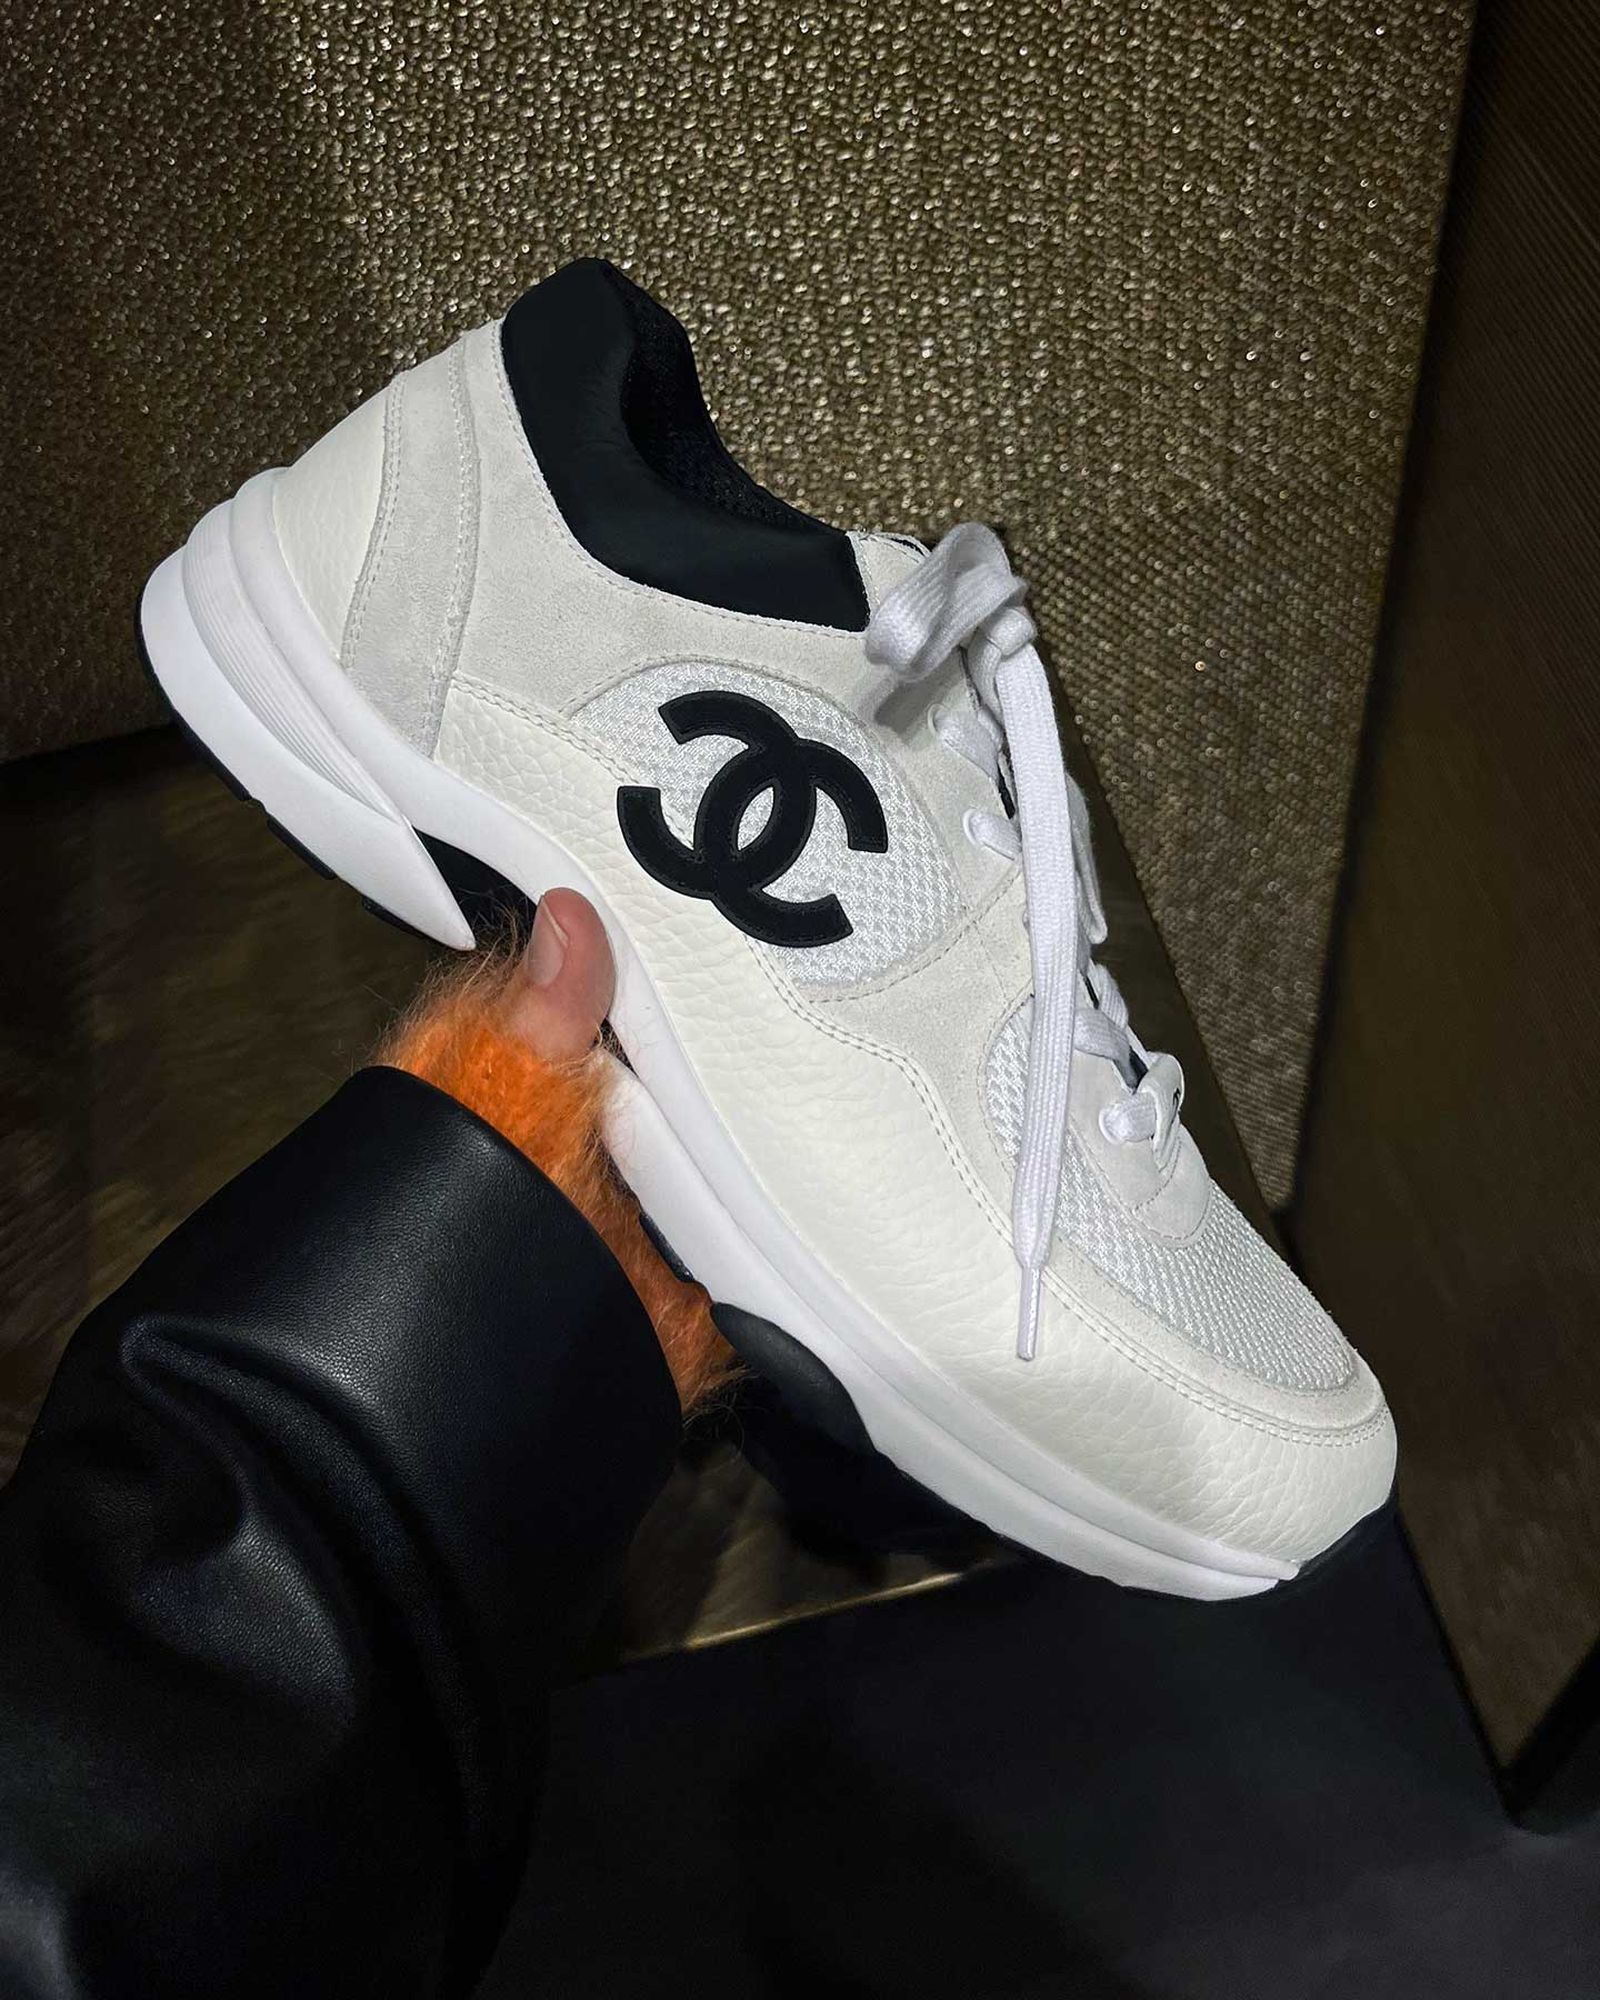 Chanel's Sneaker Game Is Improving